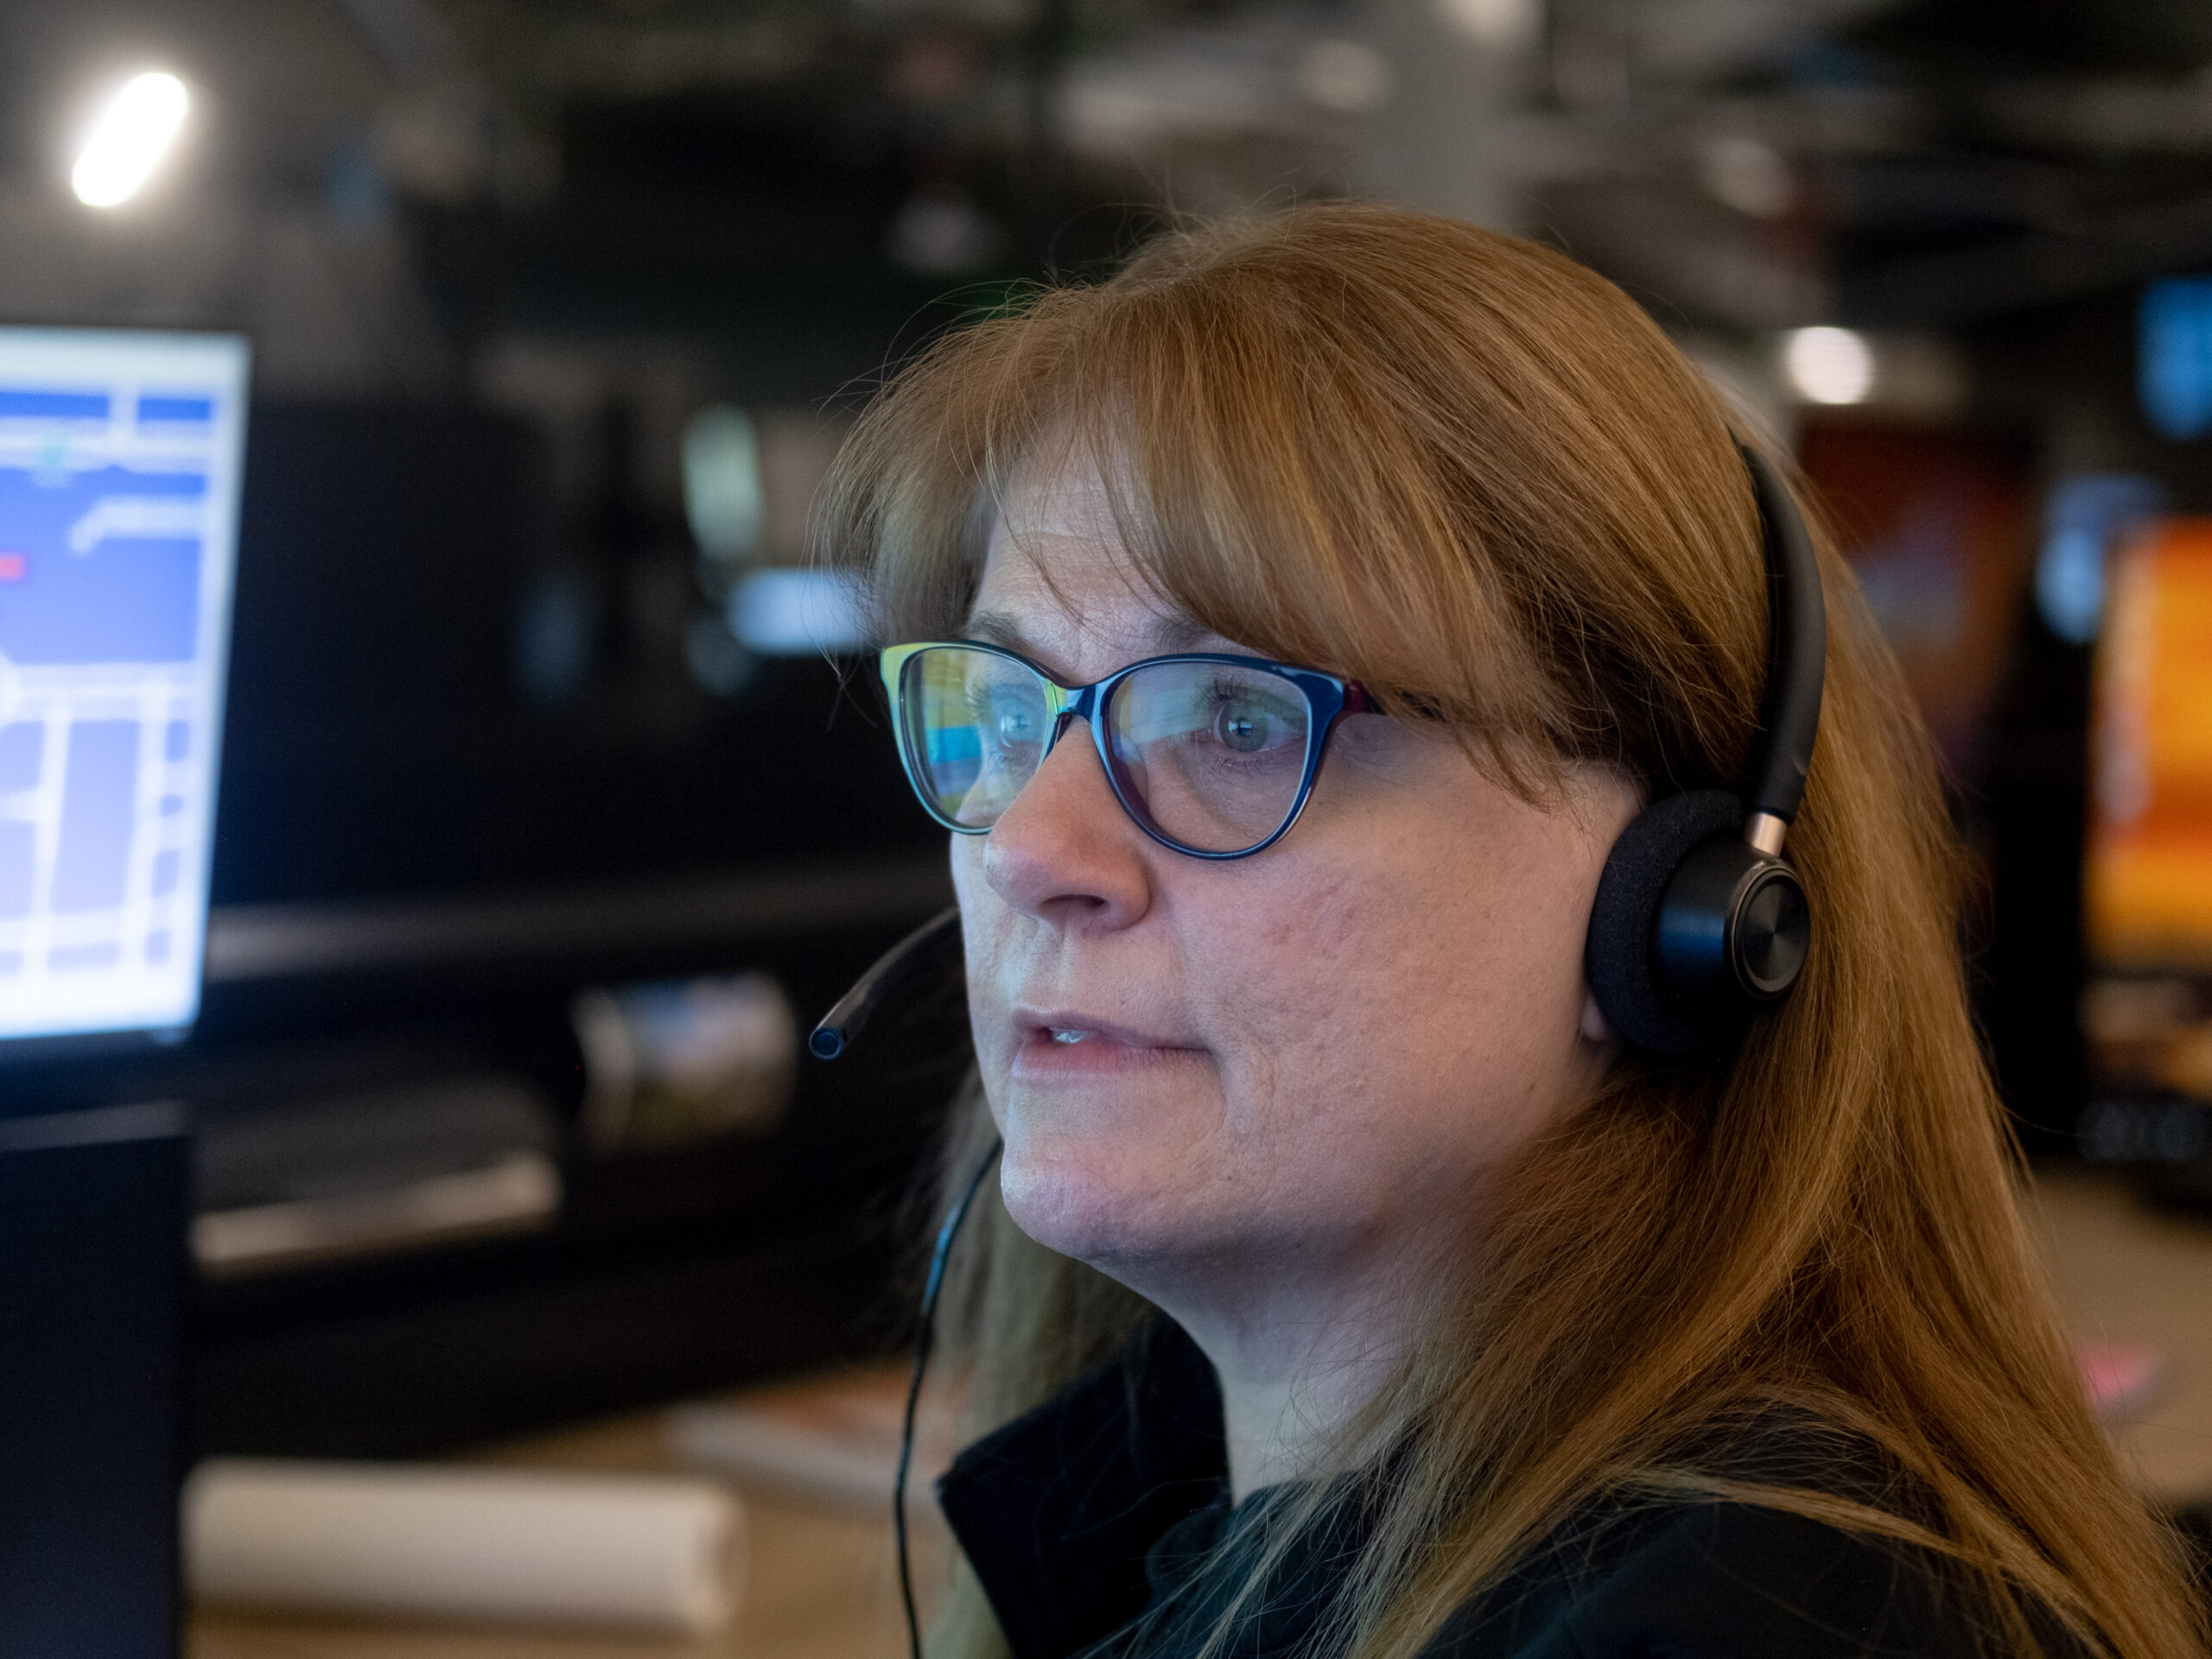 Many 911 call centers are understaffed, and the job has gotten harder